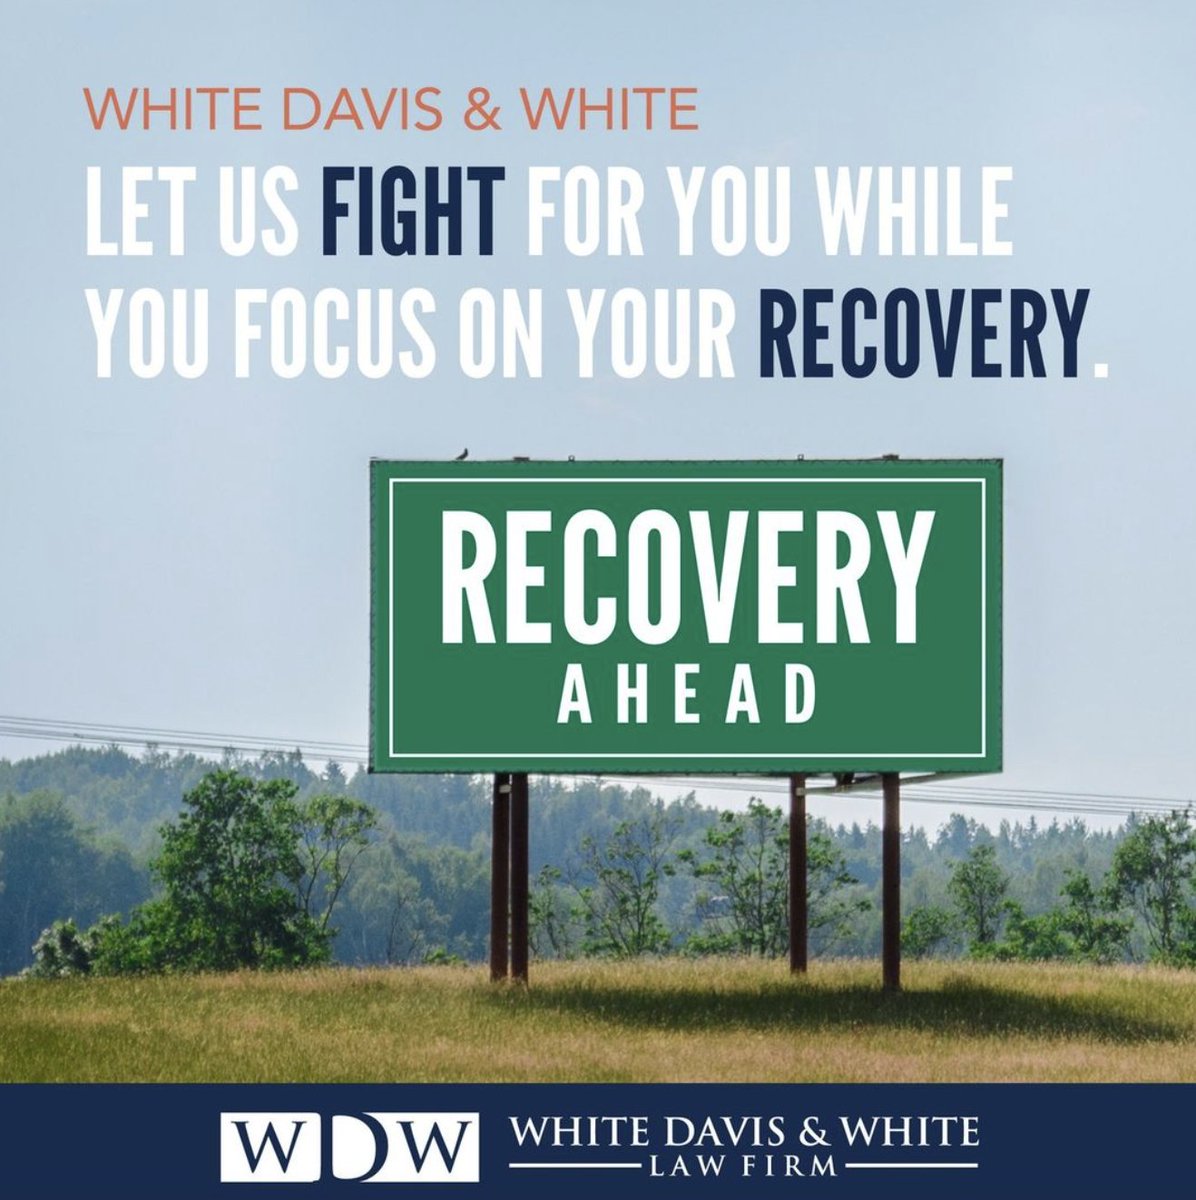 Injured in an accident? Let us fight for you while you focus on your recovery.

864.231.8090 | WDWLawFirm.com

#WDWLawFirm #WhiteDavisandWhite #law #lawyer #legal #lawyers #attorney #lawfirm #lawyerlife #justice #attorneyatlaw #advocate #personalinjury #accidentlawyer